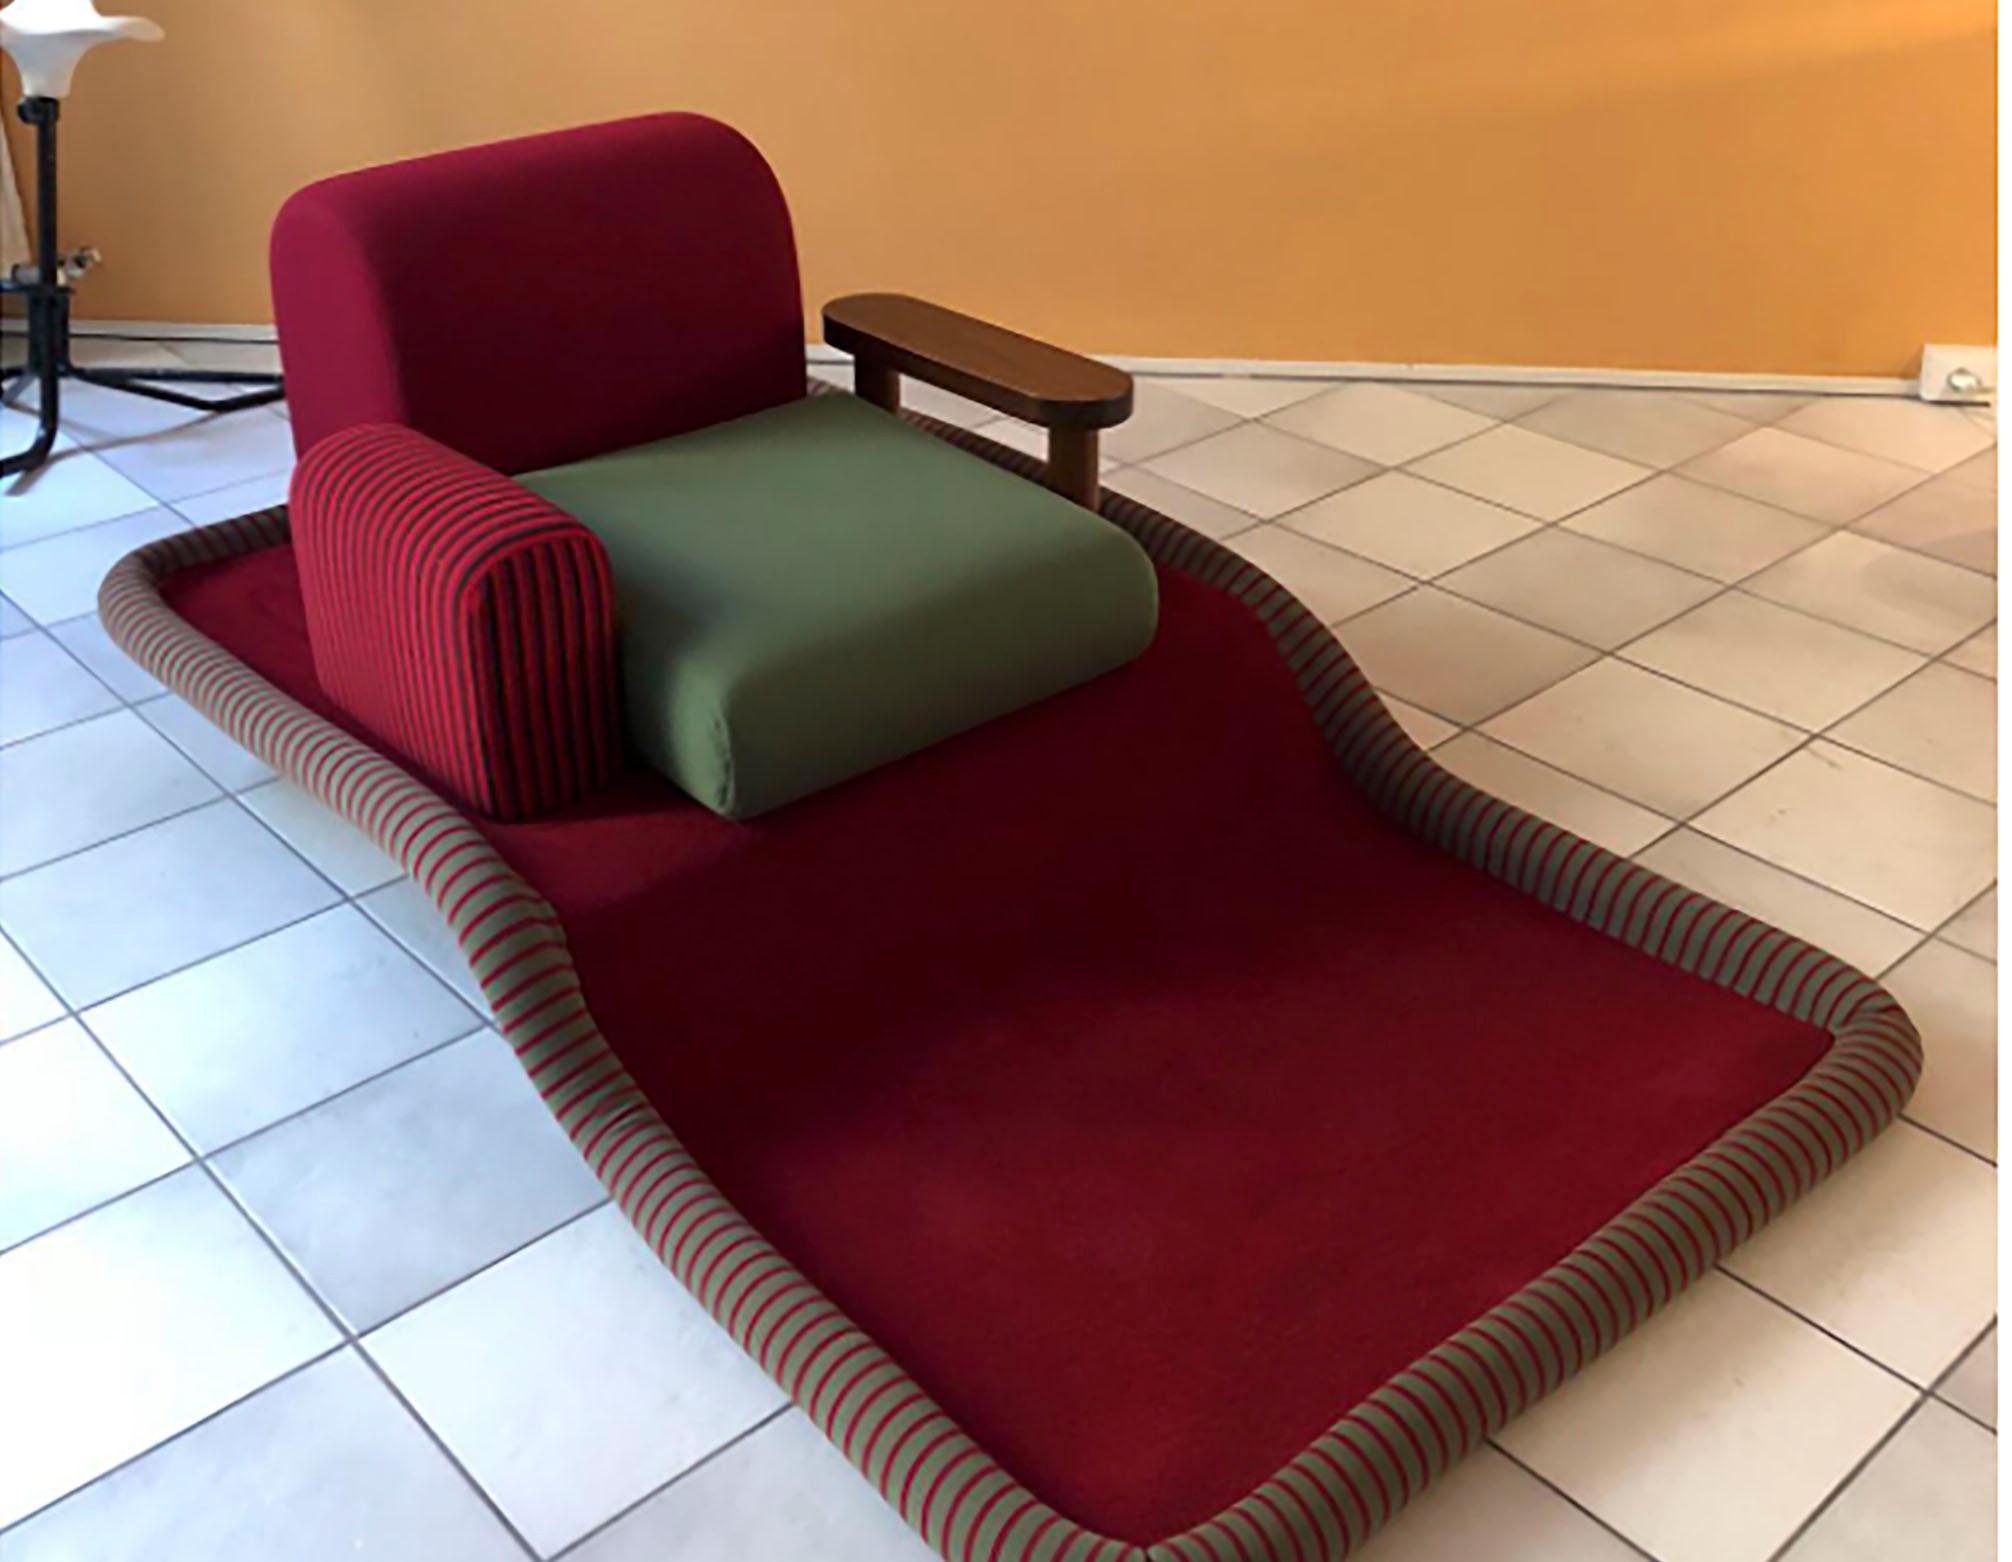 Rare, if not unique
Flying carpet sofa Ettore Sottsass,
circa 1974.
Measures: 217 x 107 x 65 cms
Published by bedding patentti Italy
Wood / fabrics / velvet / carpet
In a perfect state.

29000 Euros.